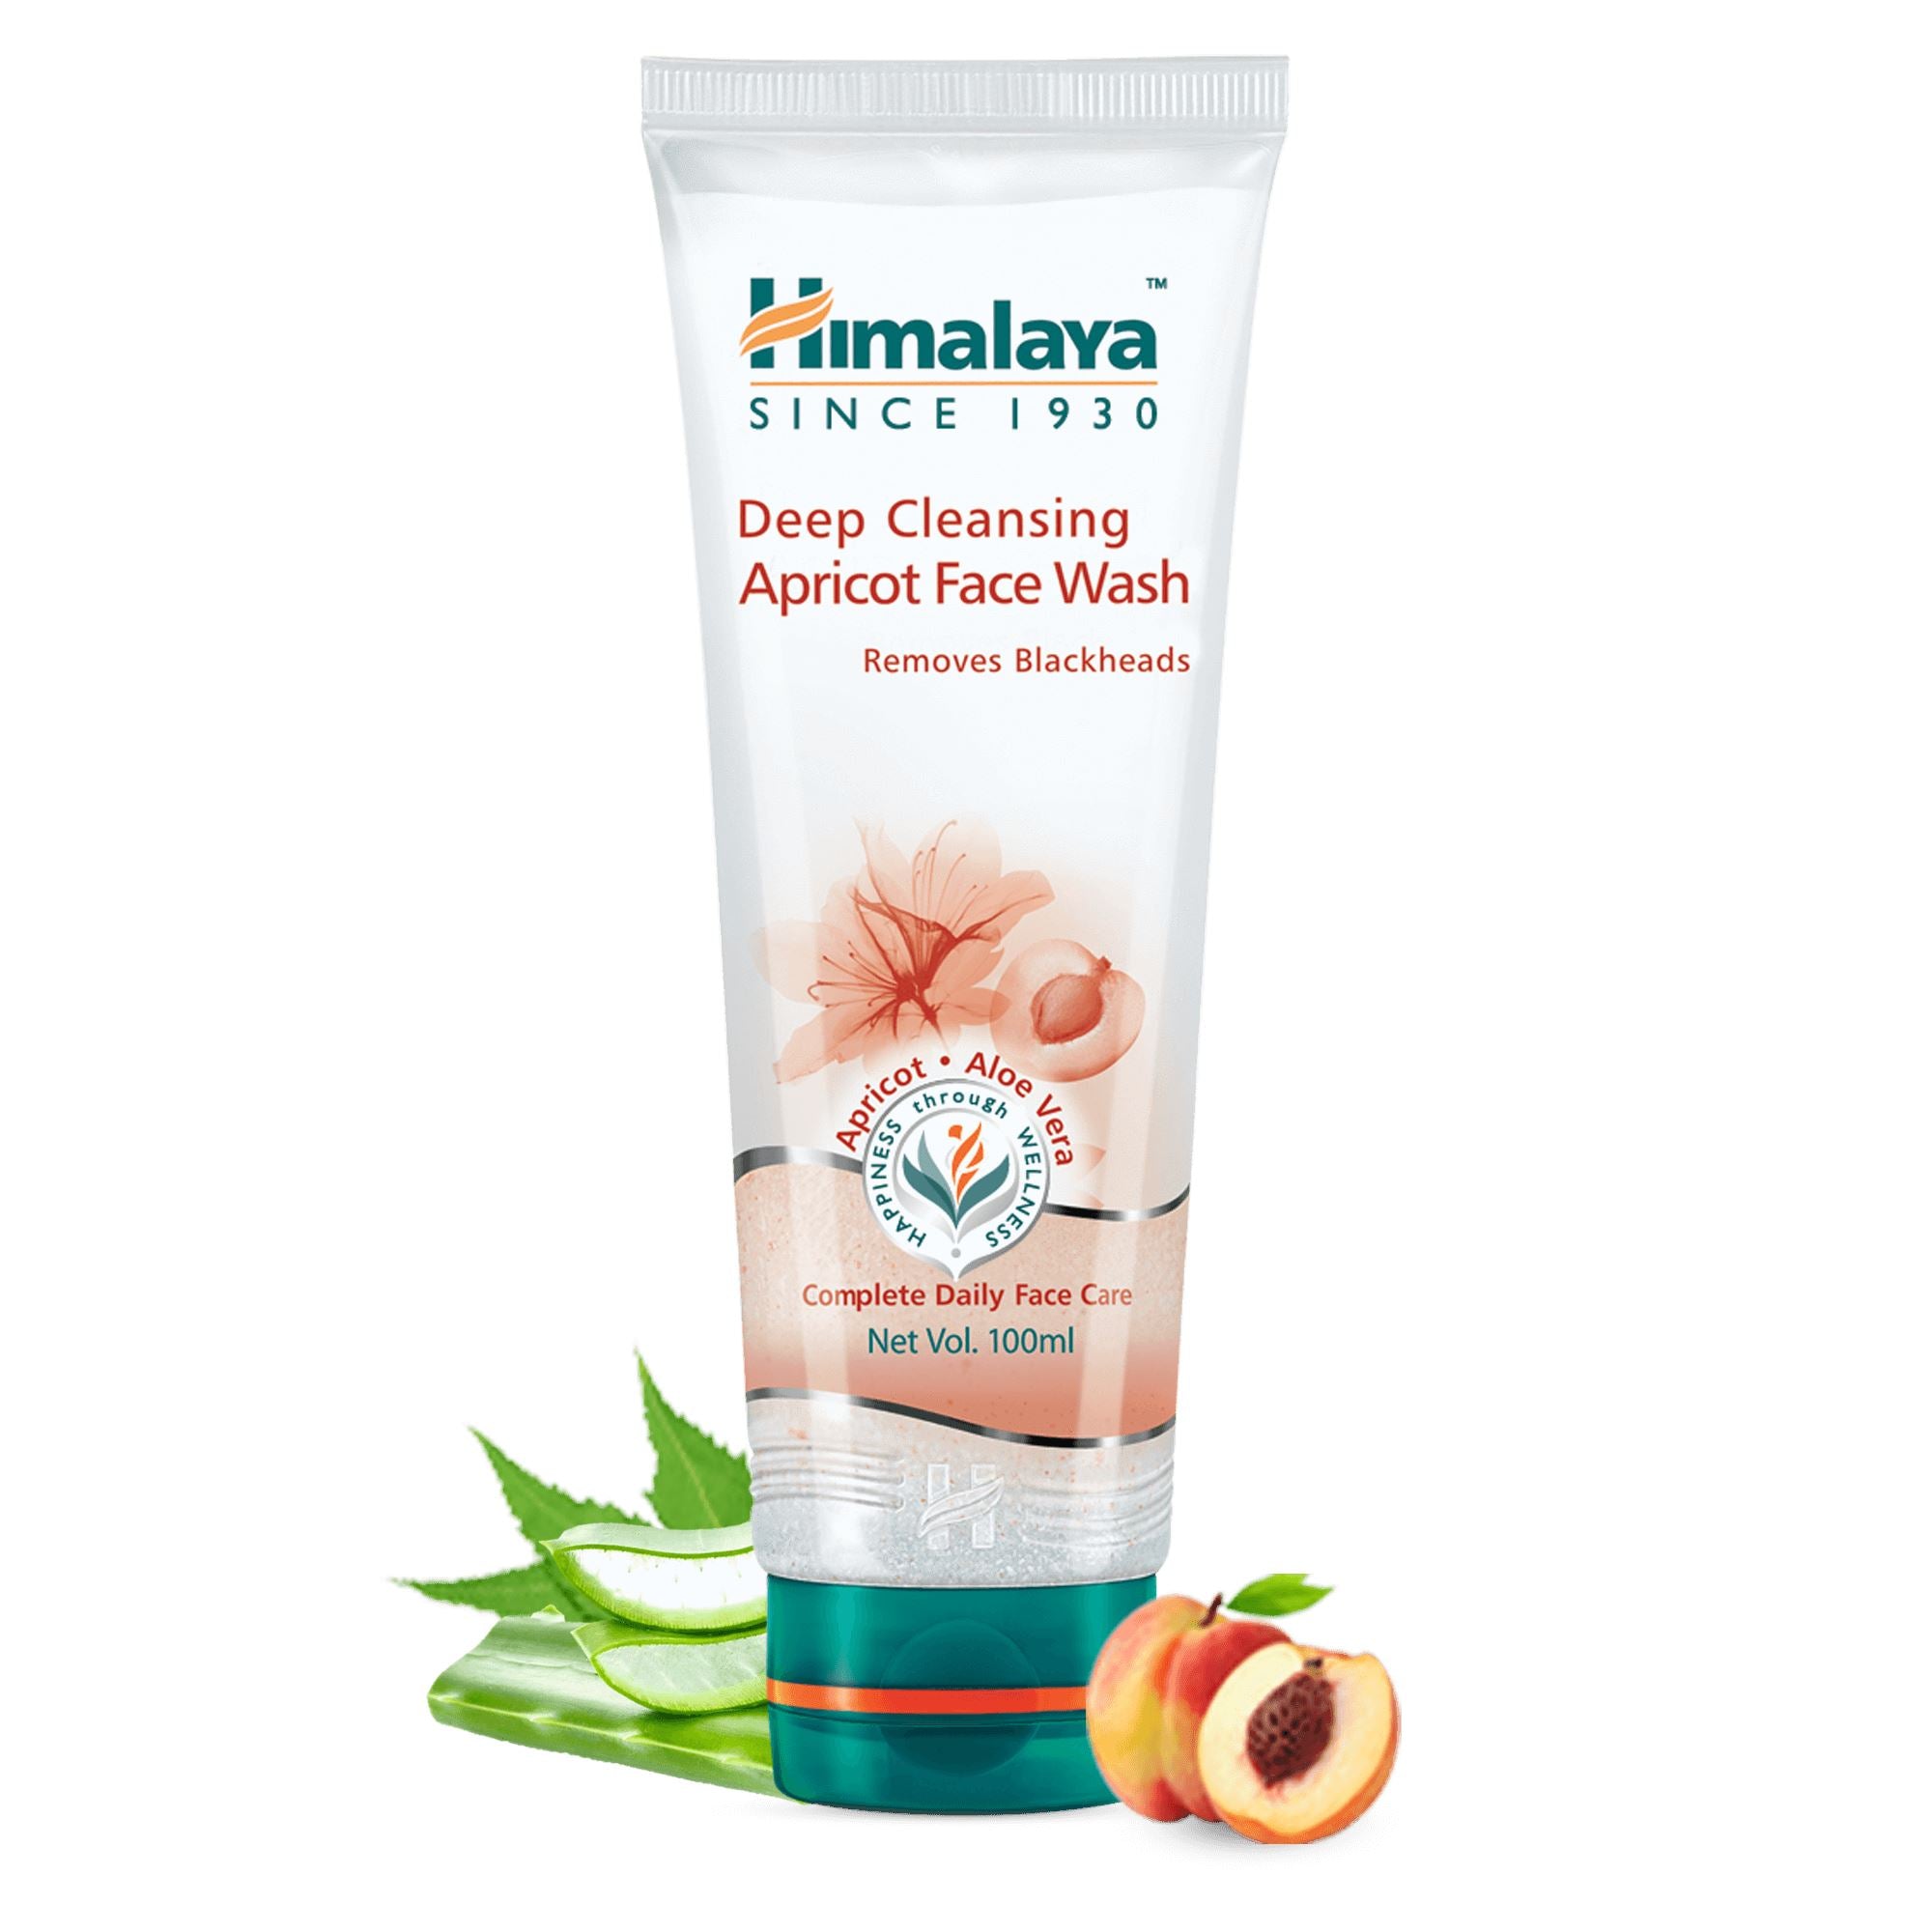 Himalaya Deep Cleansing Apricot Face Wash 100ml - Removes blackheads